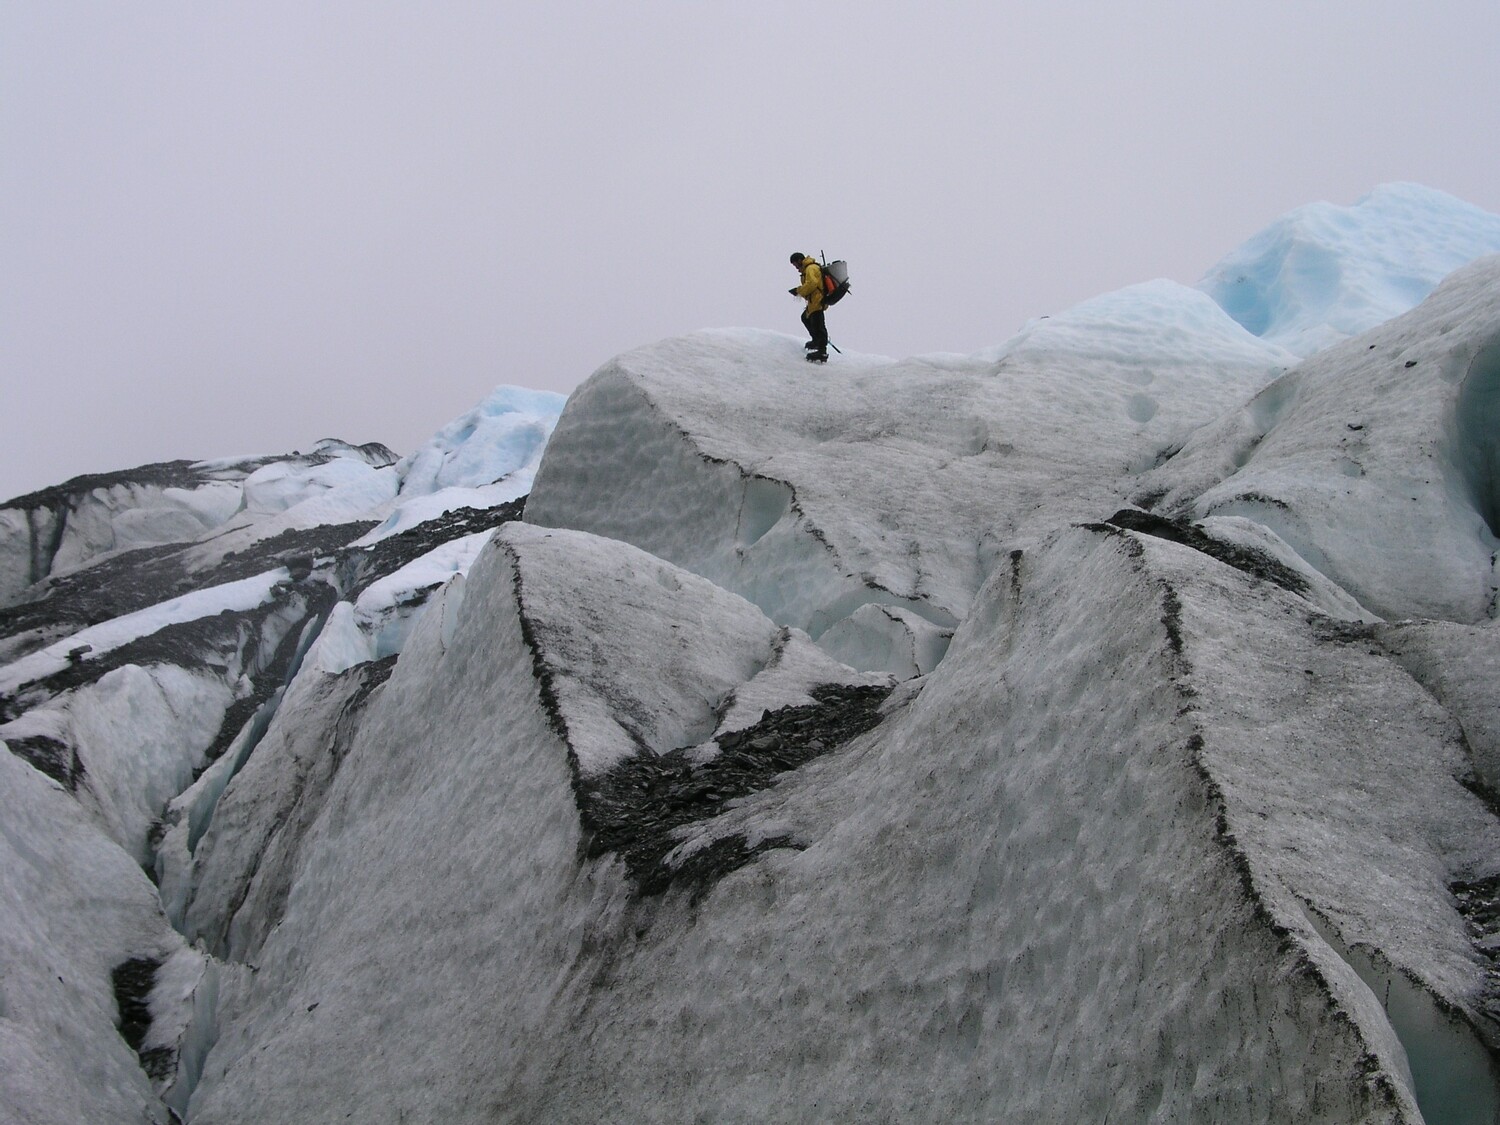 Field work on the glaciers of Patagonia.